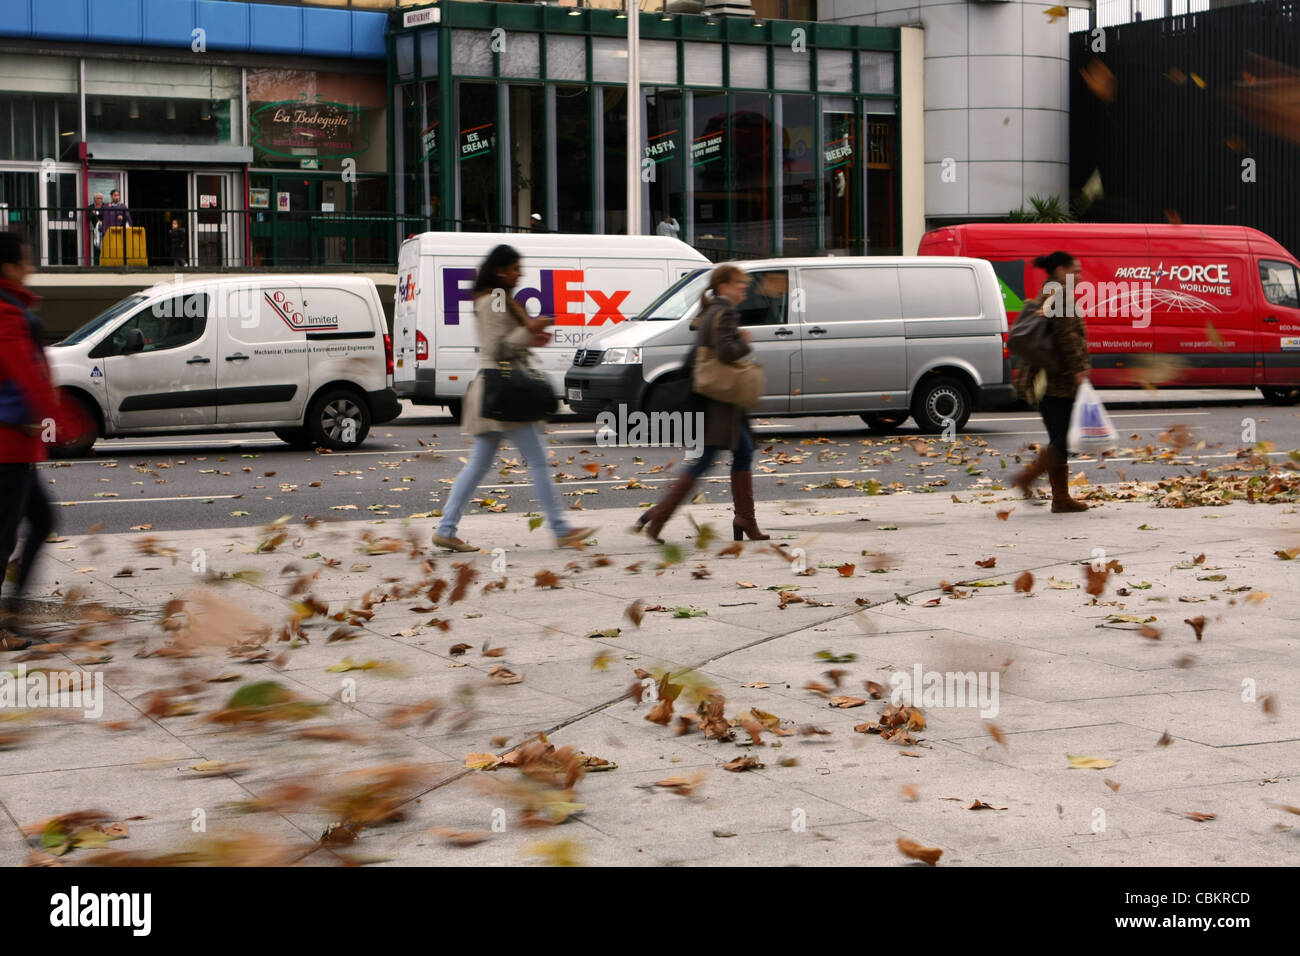 people caught in a gust of wind blowing leaves along a pavement and traffic in the background Stock Photo